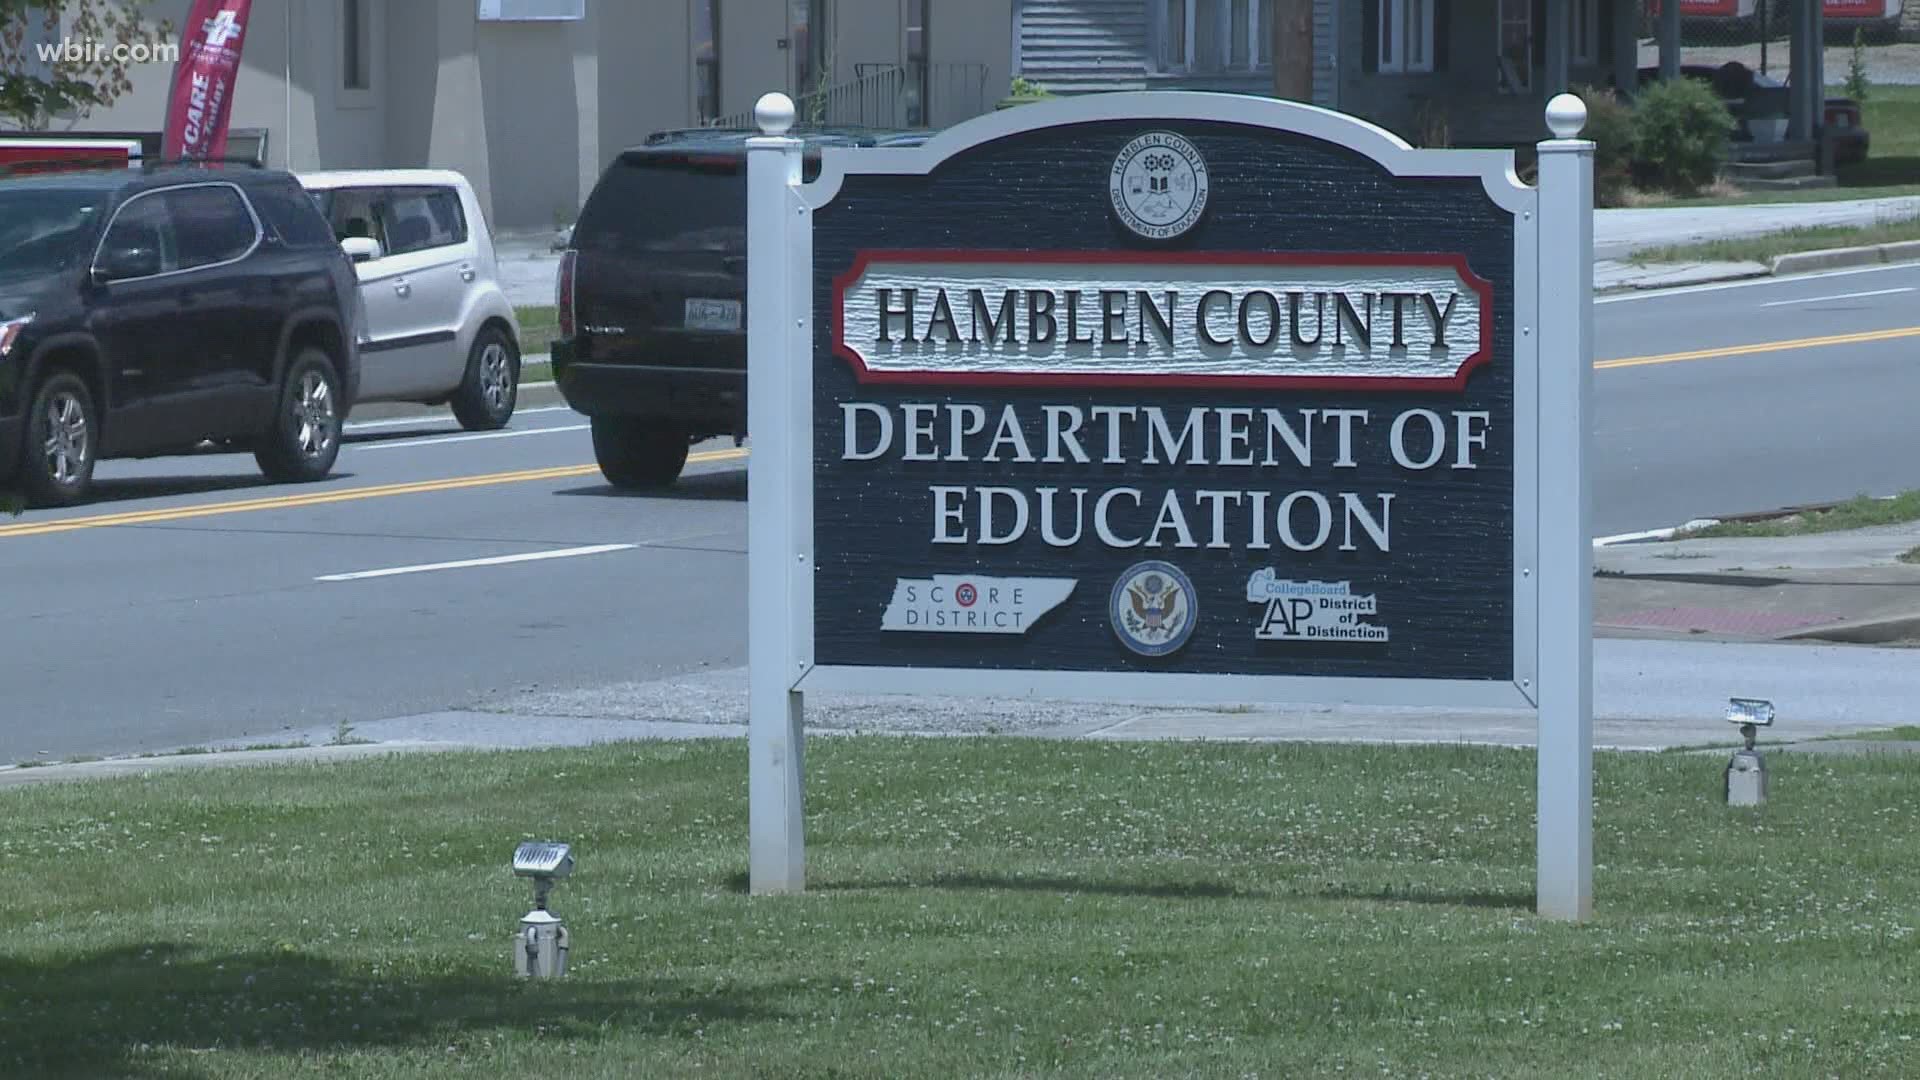 In Hamblen County, school administrators are working to get thousands of computers for students in time for the fall.